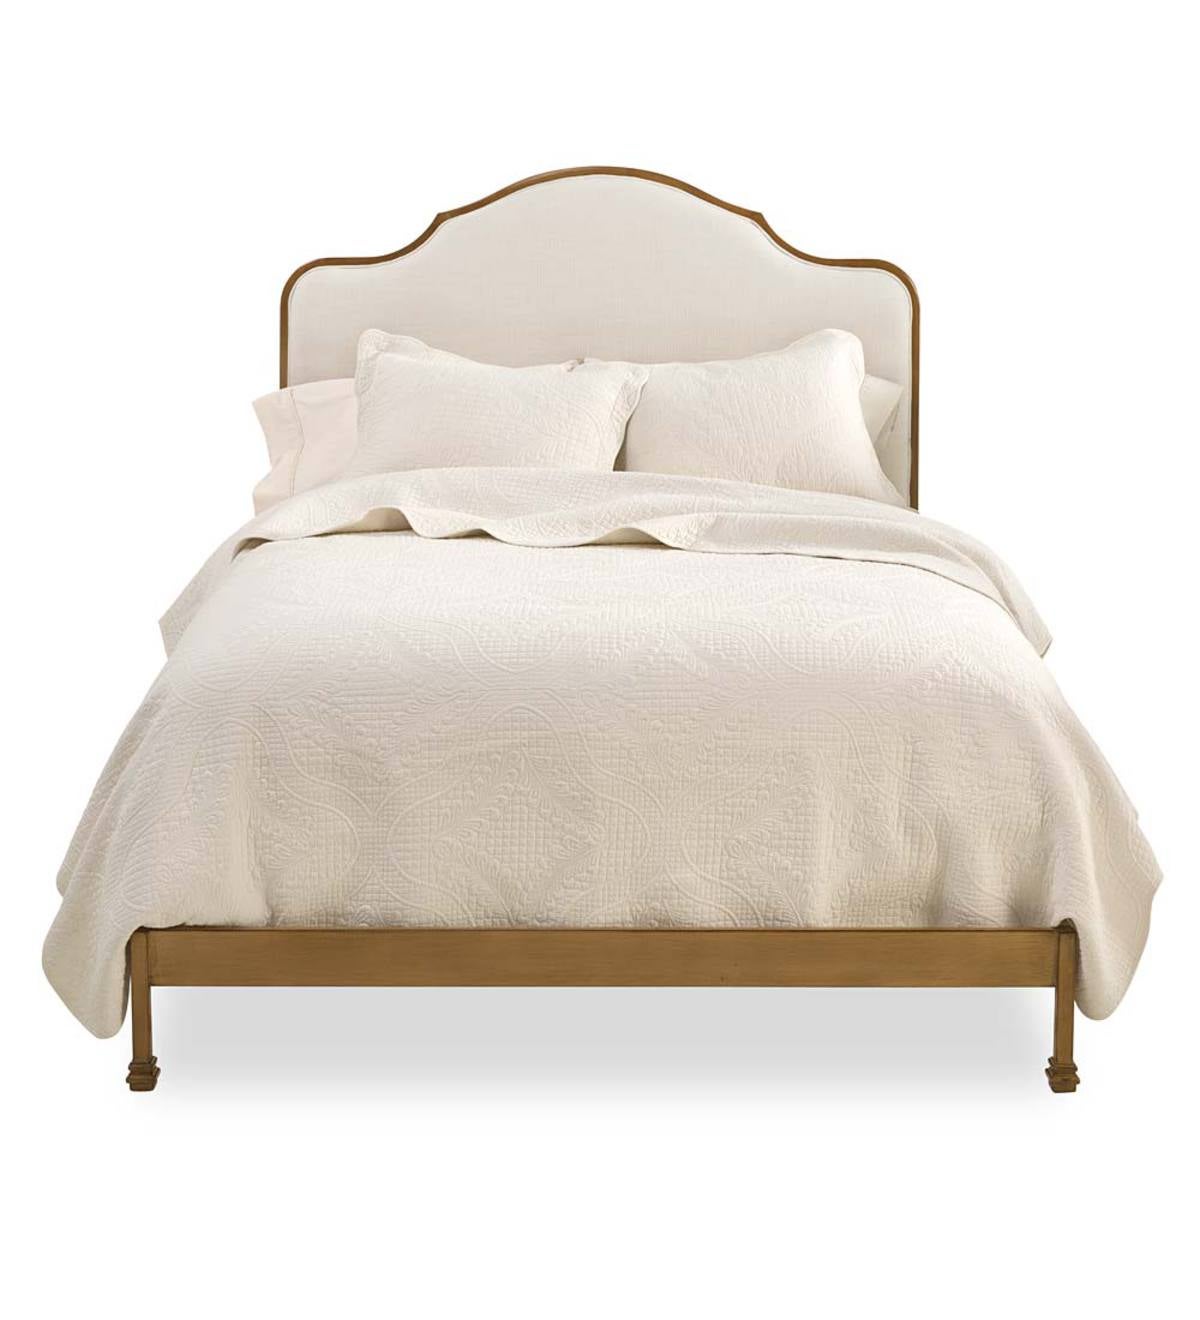 Alexa King Bed With Upholstered, Country King Bed